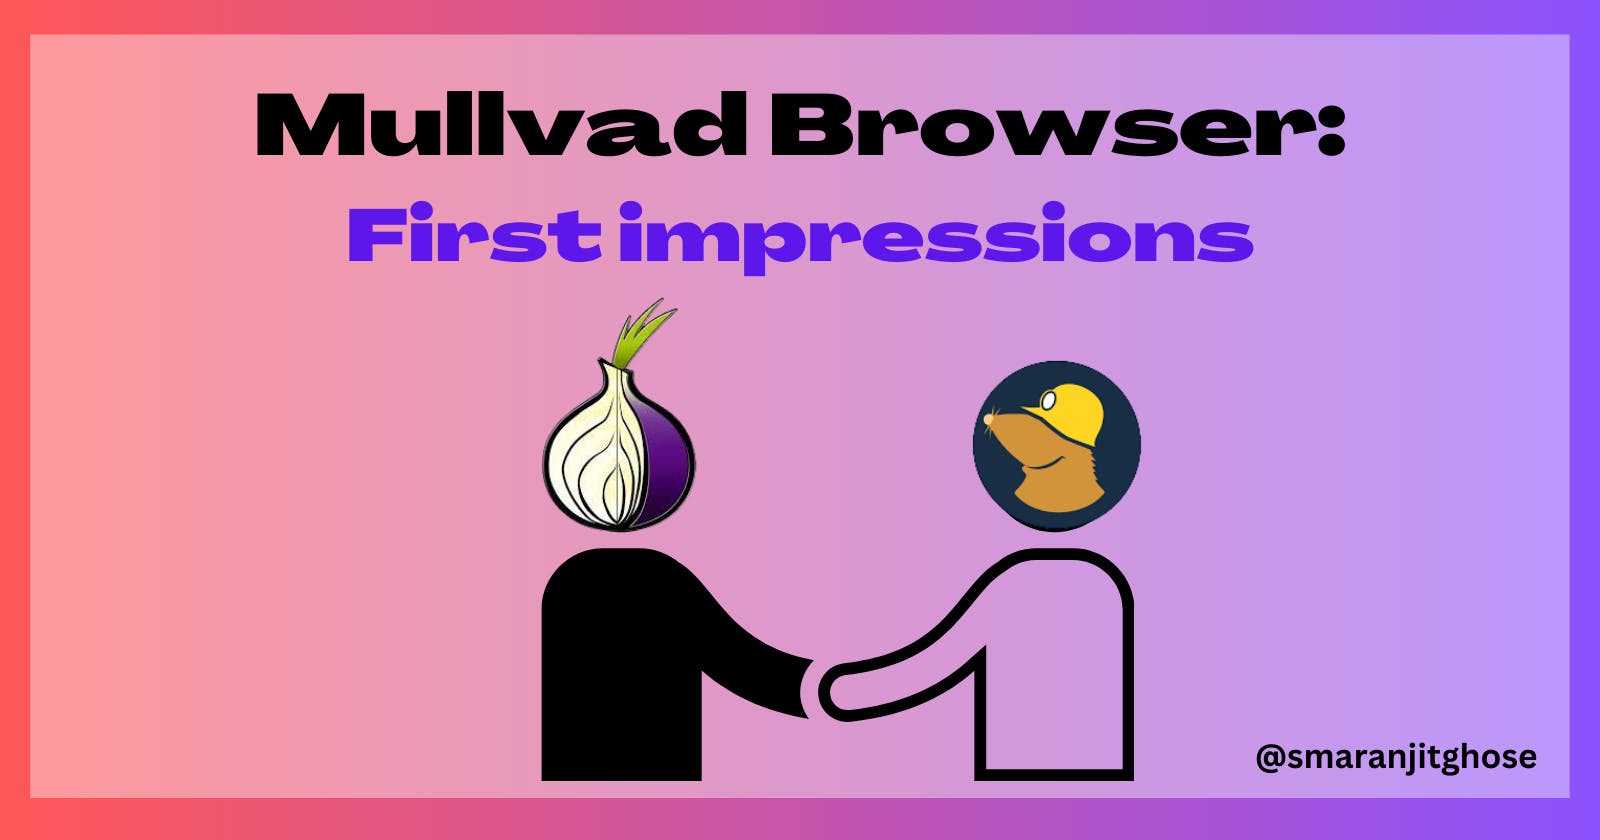 Mullvad Browser - A first glance